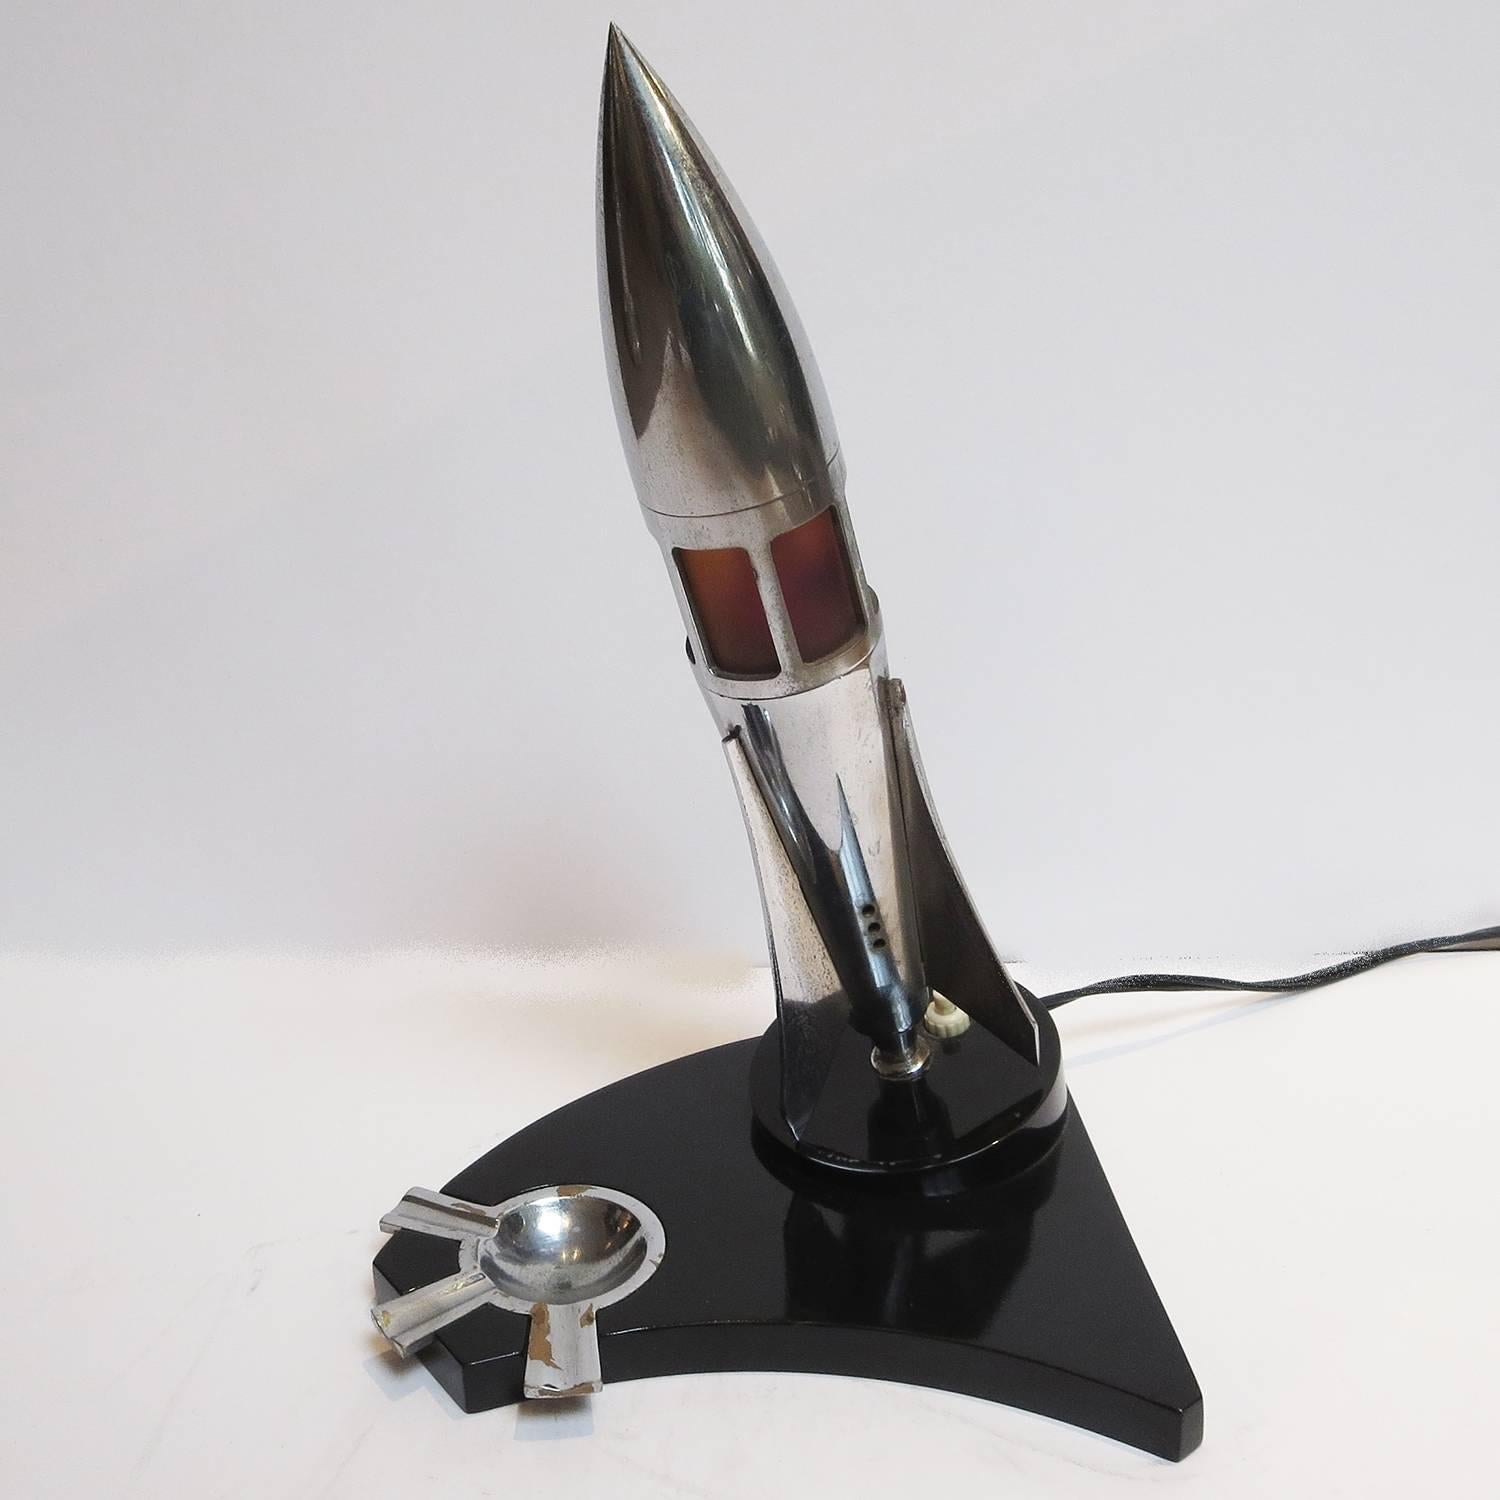 Smoking in style! This great desk top rocket features a small lamp through the red windows, and a small chromed ashtray. The base is black lacquered wood in excellent condition. The chrome elements show minor wear.